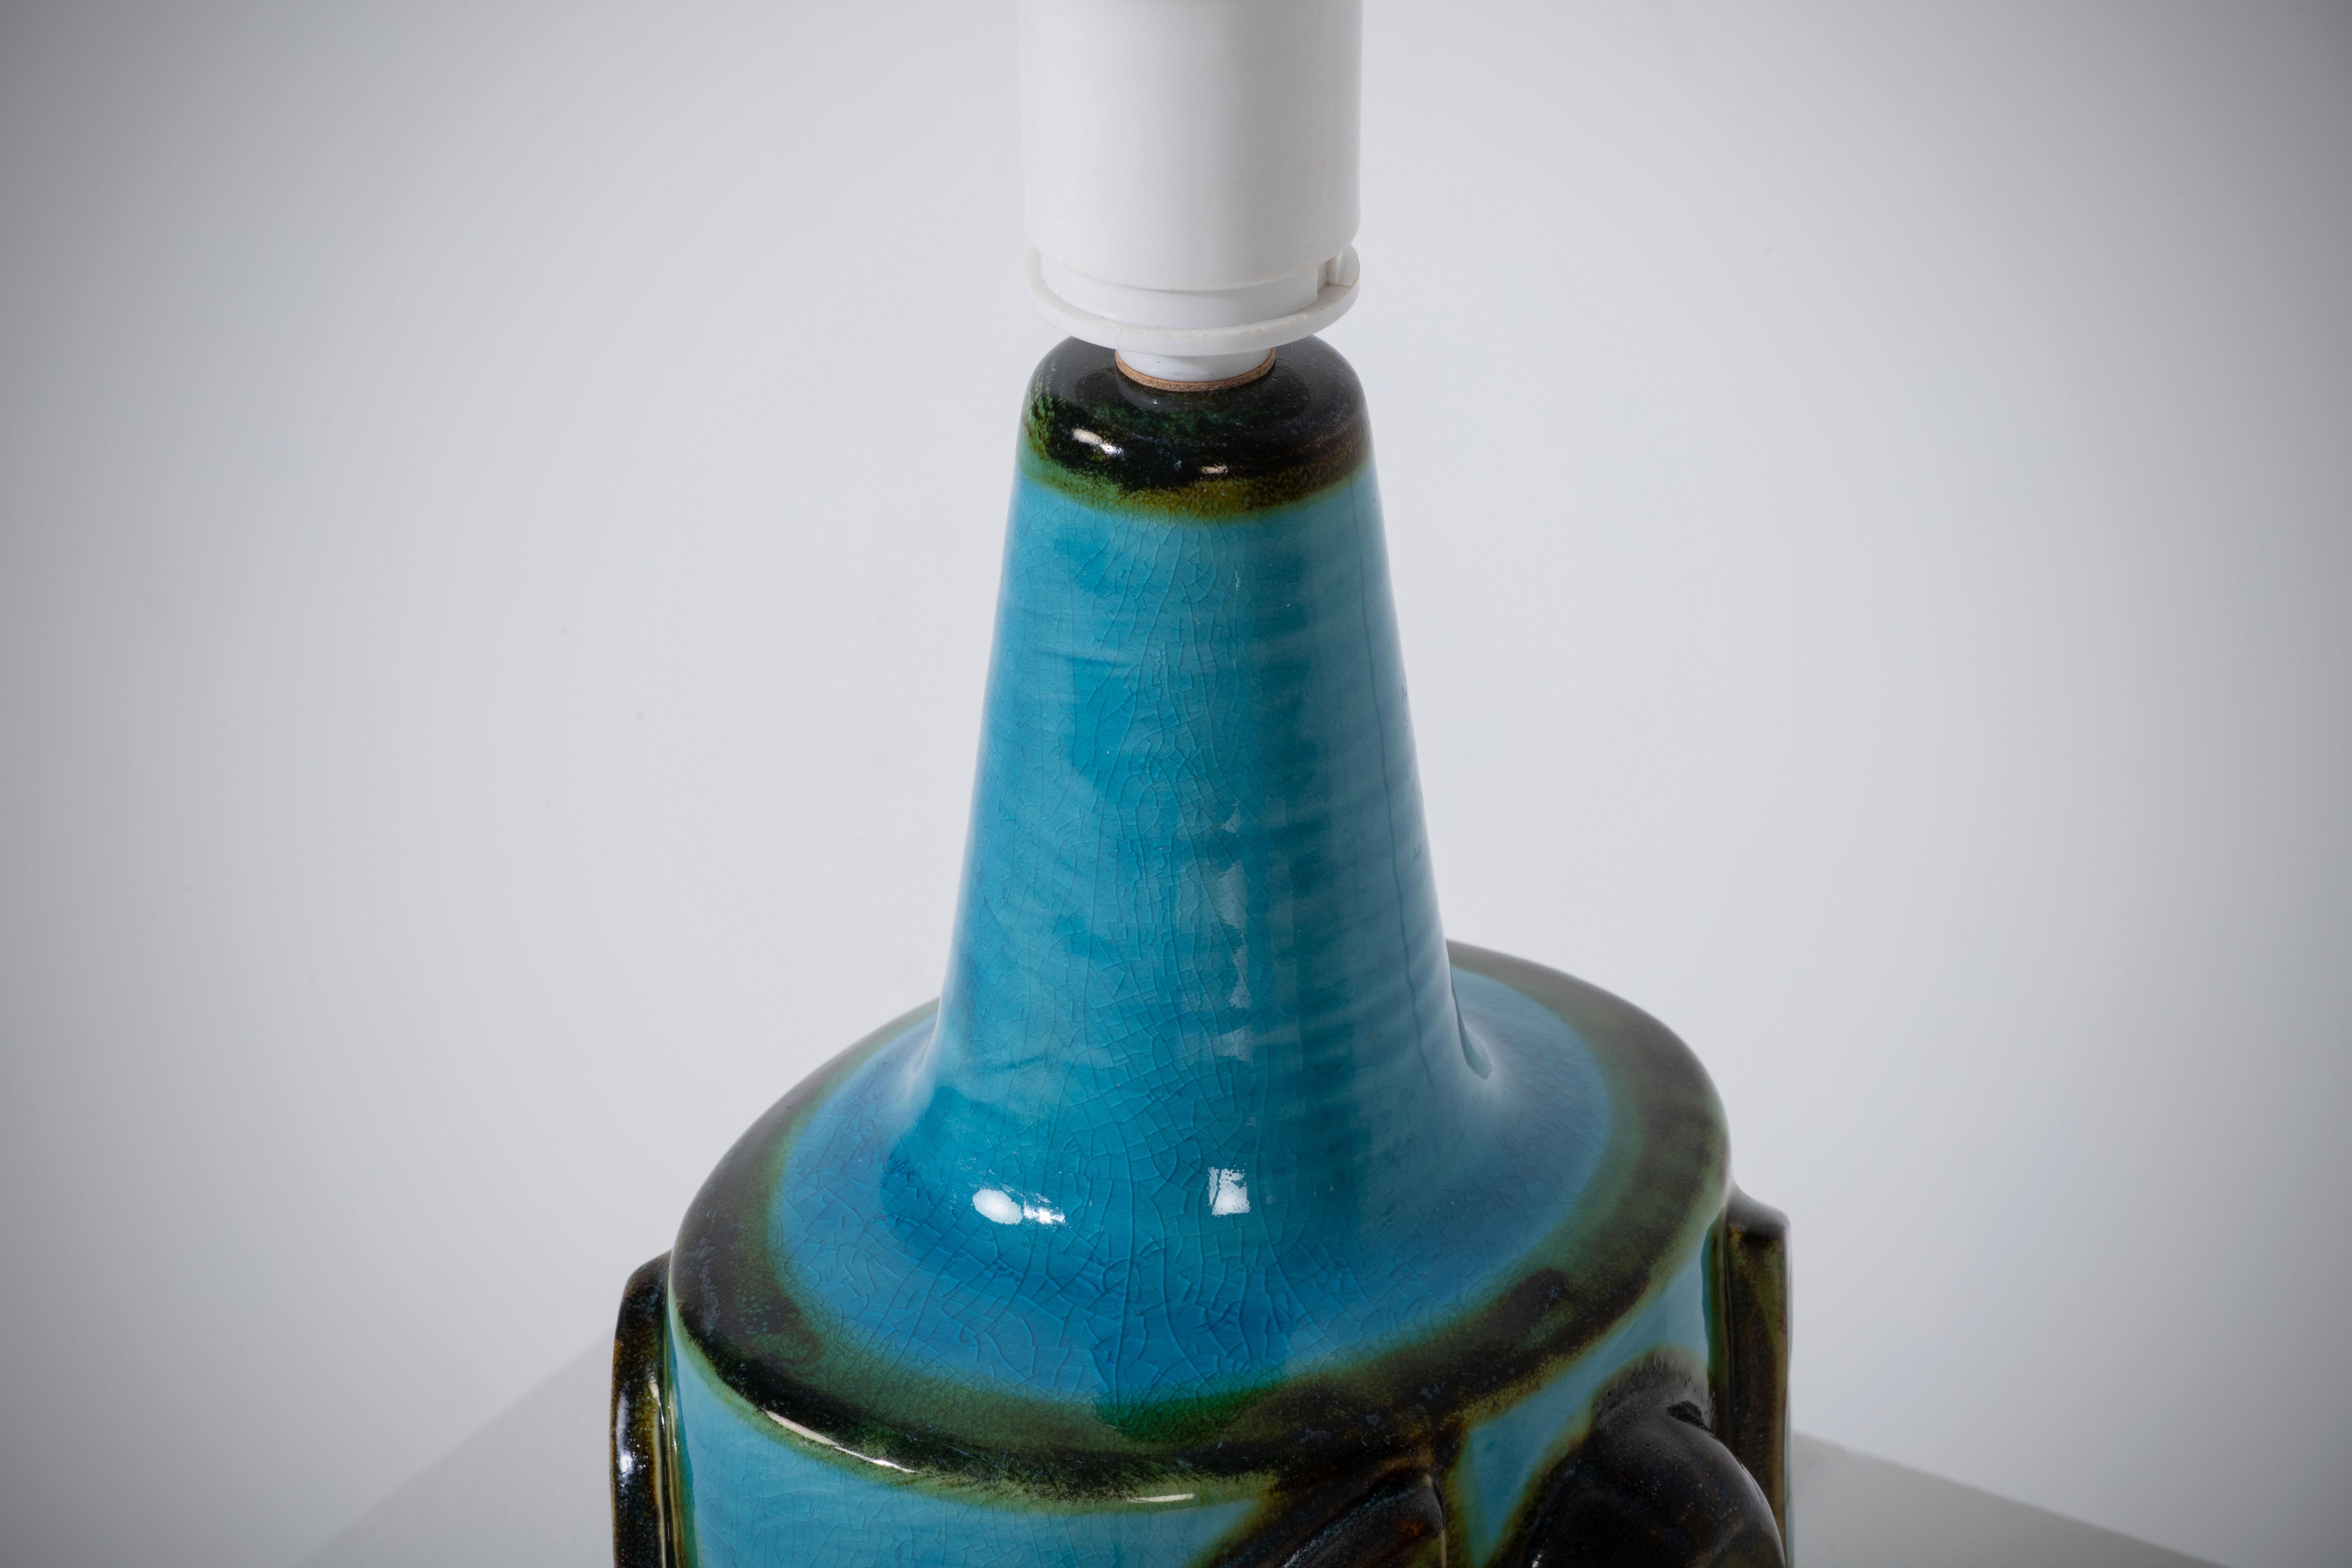 Pair of Turquoise Søholm Table Lamps by Einar Johansen, Denmark, 1960s For Sale 7